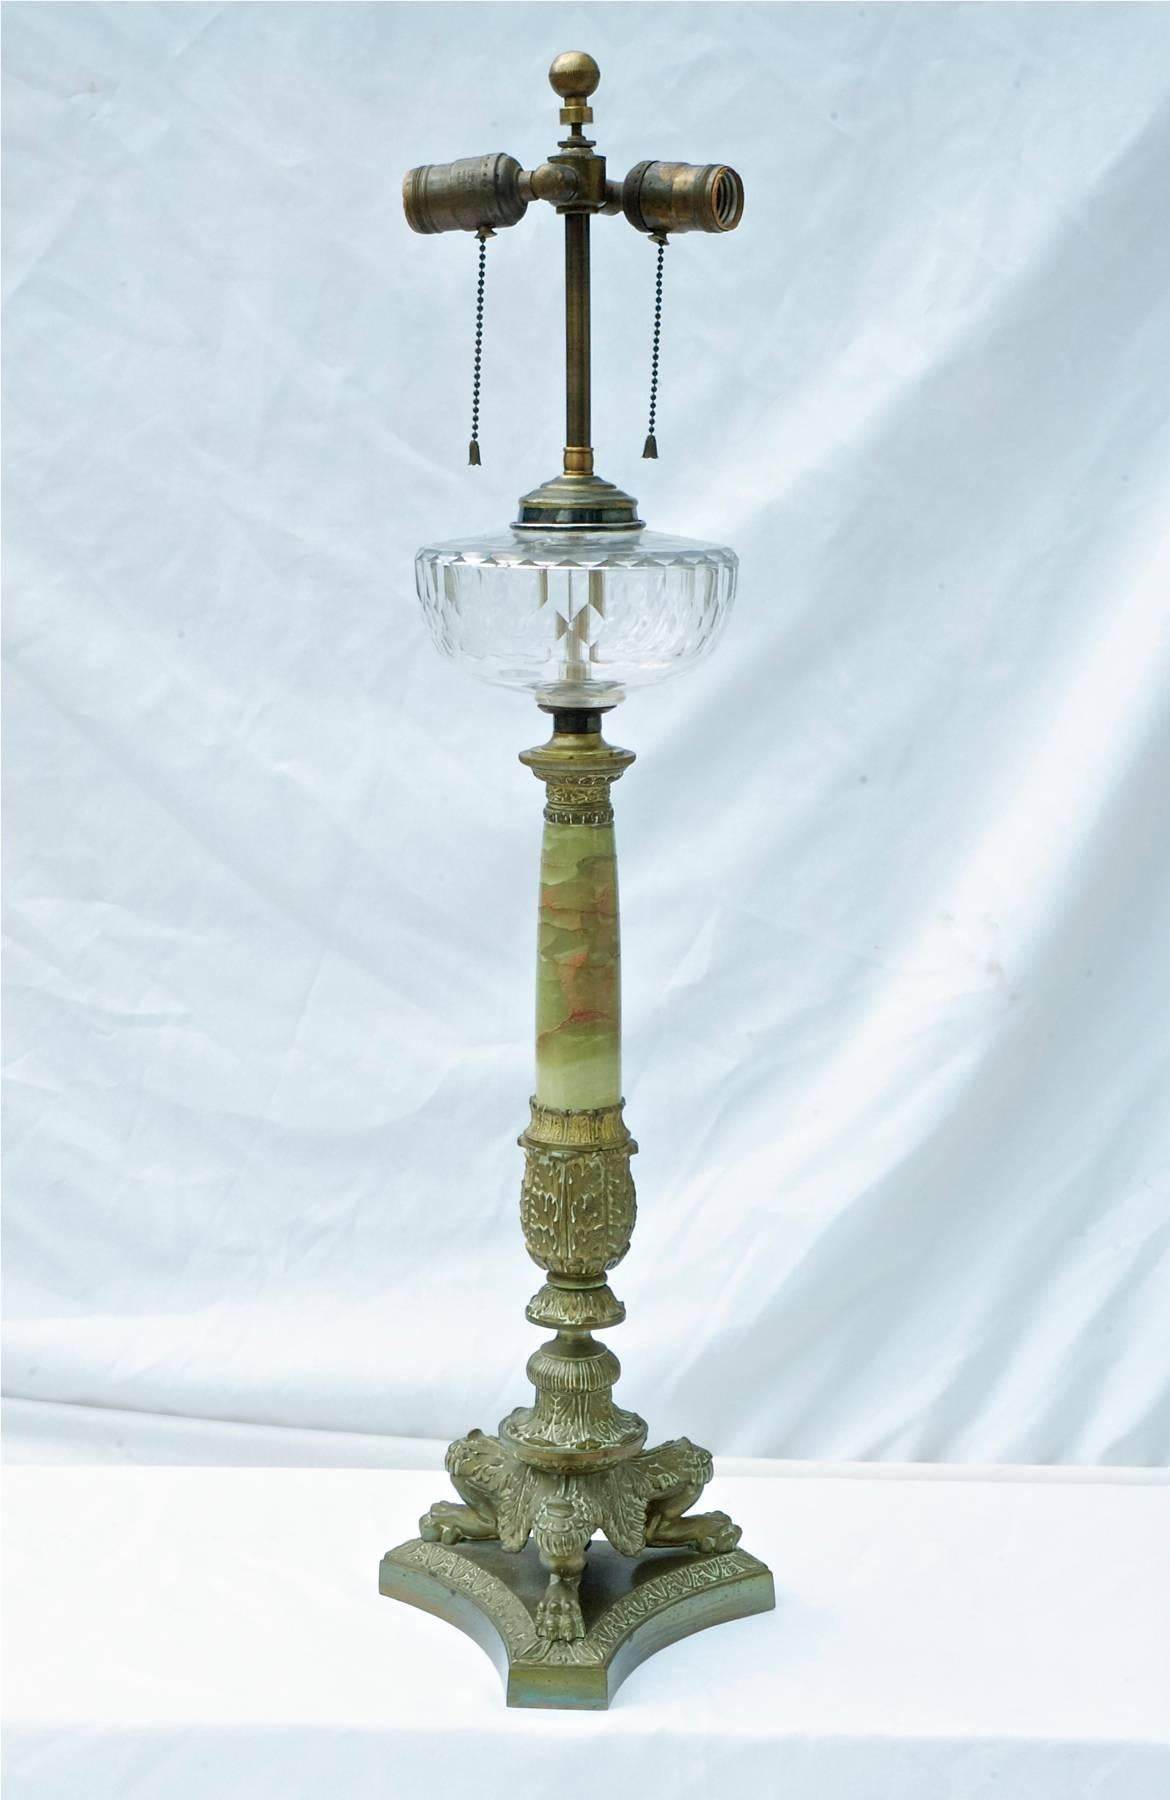 A single French Empire table lamp converted from original oil lantern. Comprised of green onyx , brass and bronze works the light possesses scale and stature that will work well in any traditional interior.
Lamp sells and ships without the pictured